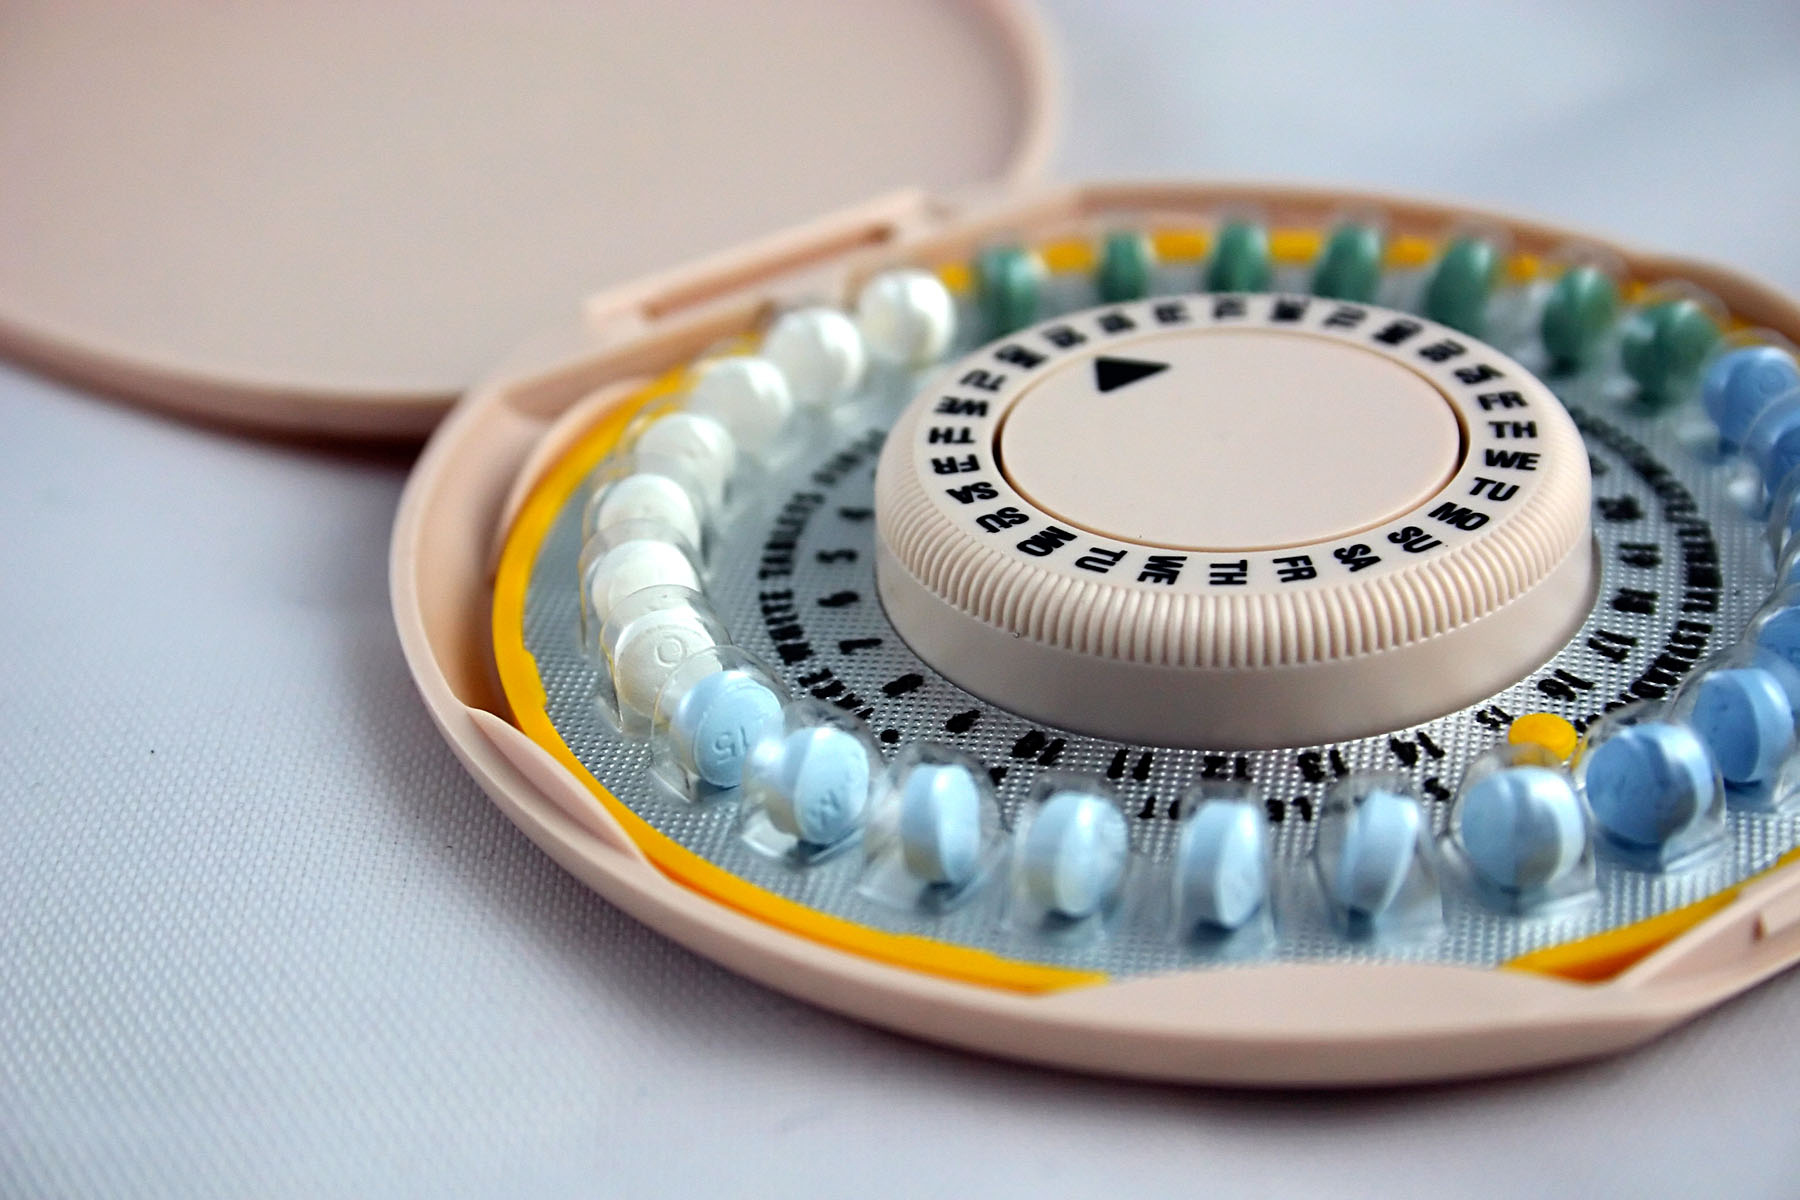 First OTC Contraceptive Pill Approved - Lachman Consultants